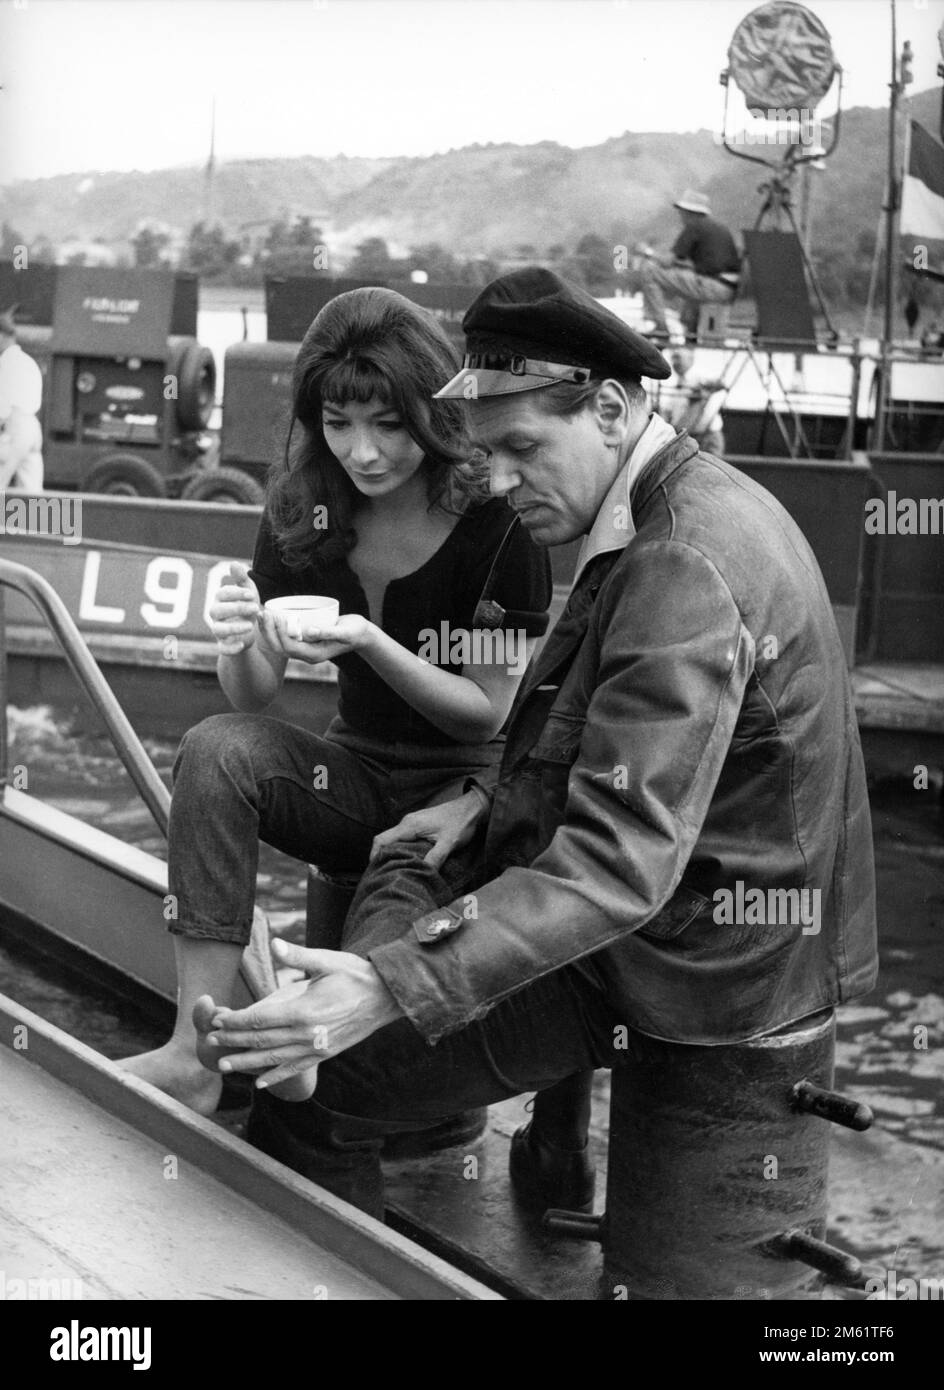 JULIETTE GRECO and O.W. FISCHER on set location candid on boat on river Rhine during filming of WHIRLPOOL 1959 director LEWIS ALLEN novel / screenplay The Lorelei by Lawrence P. Bachmann music Ron Goodwin costume design Julie Harris The Rank Organisation Stock Photo